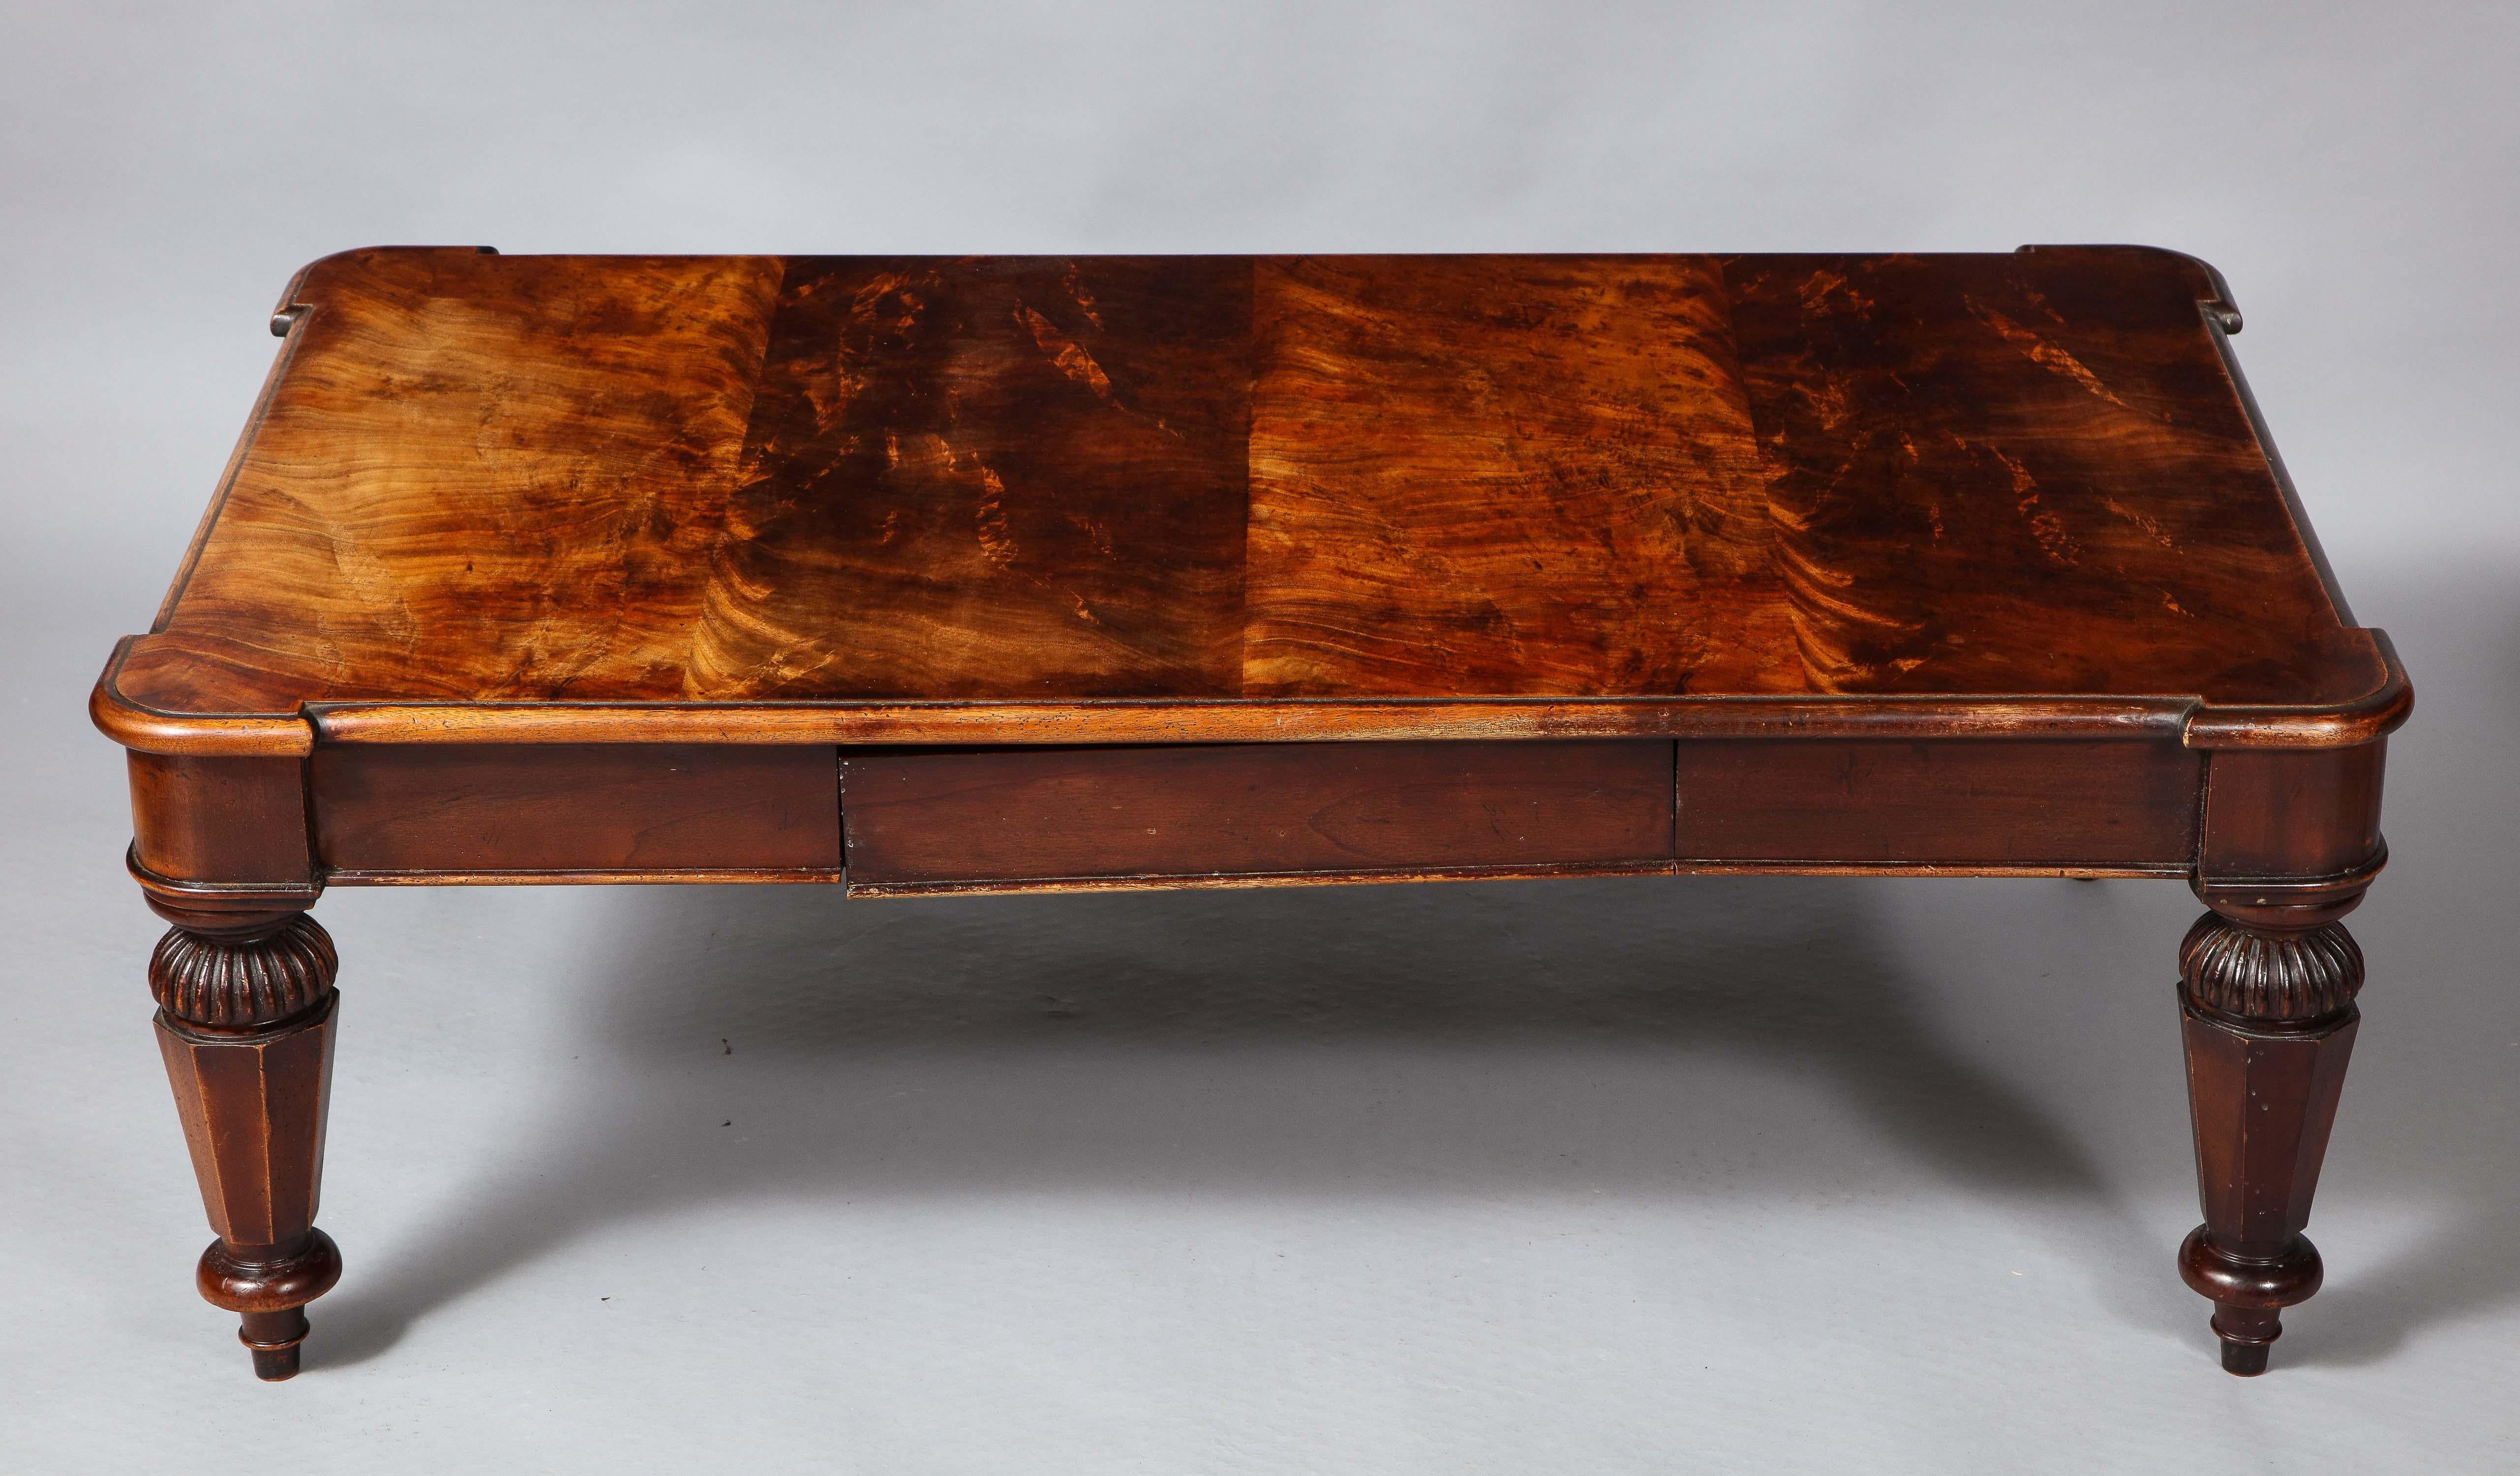 Good mid-20th century mahogany coffee table in the manner of George Smith having highly figured top with thumb molded edge over single-drawer, the turned legs with fluted collars and tapering octagonal mid sections and ending in turned feet.